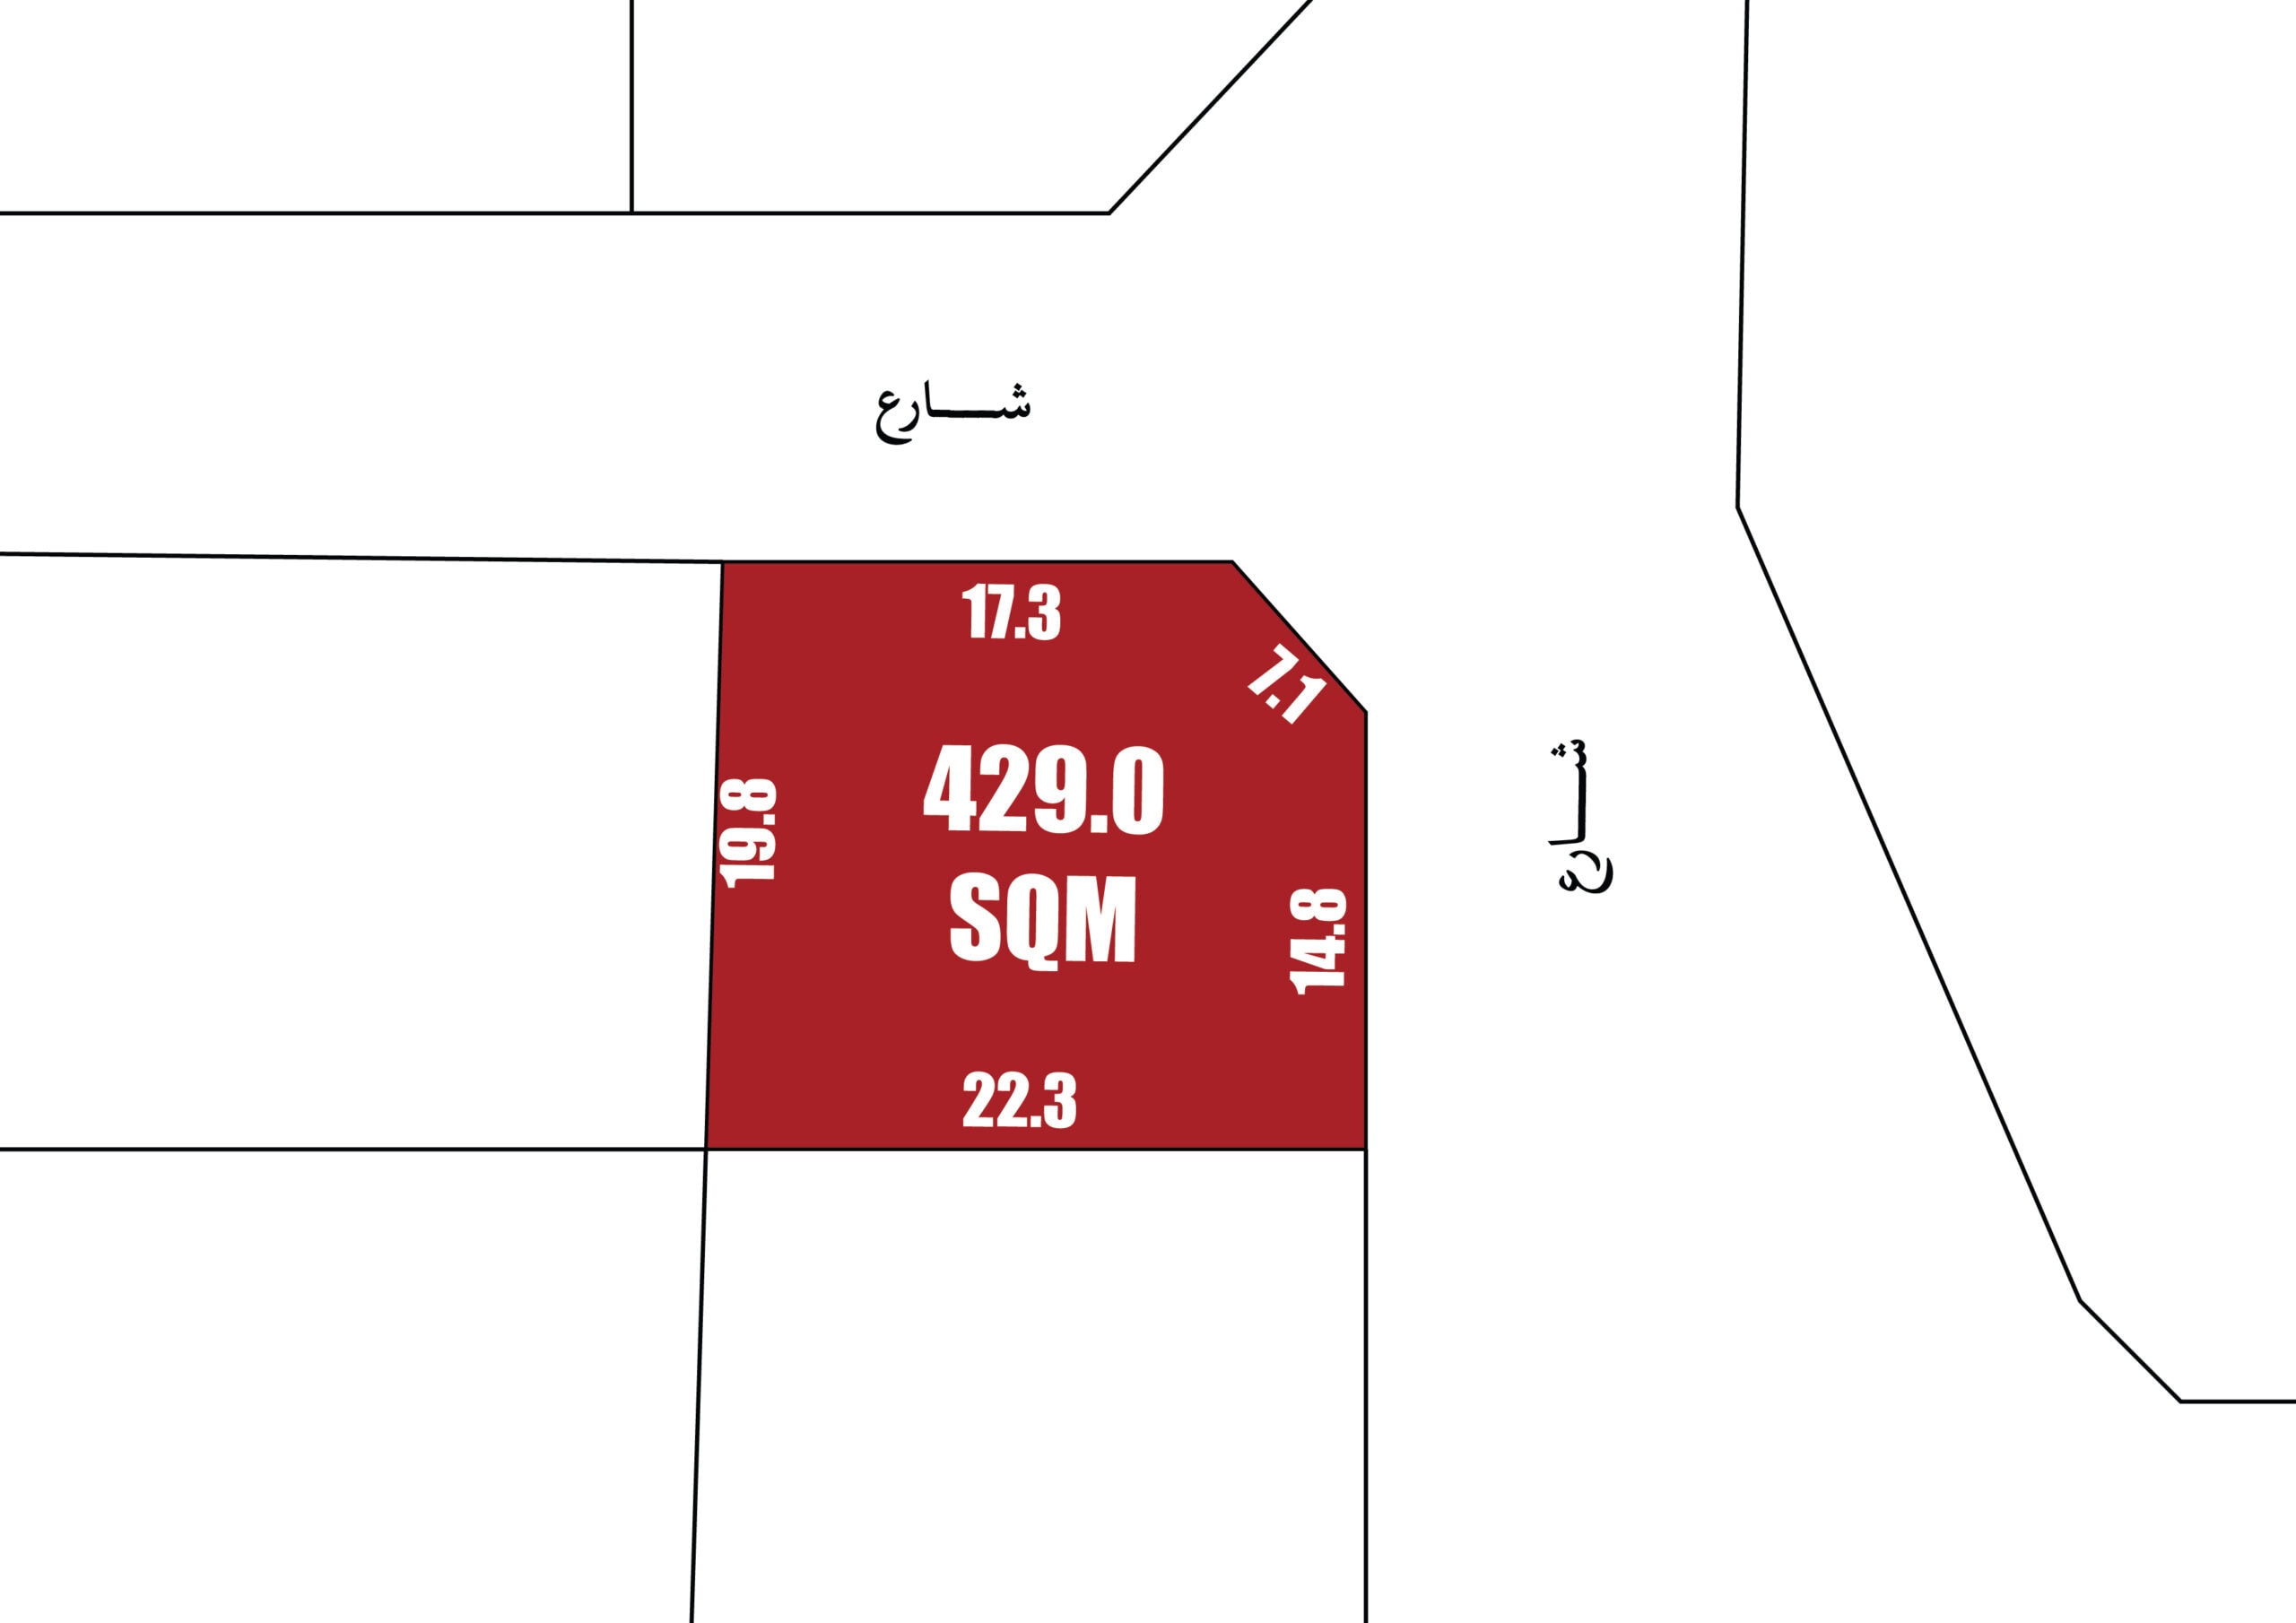 A schematic diagram showing a red-highlighted residential land plot labeled with measurements "429.0 sqm" and other numerical dimensions, surrounded by unlabeled white plots.